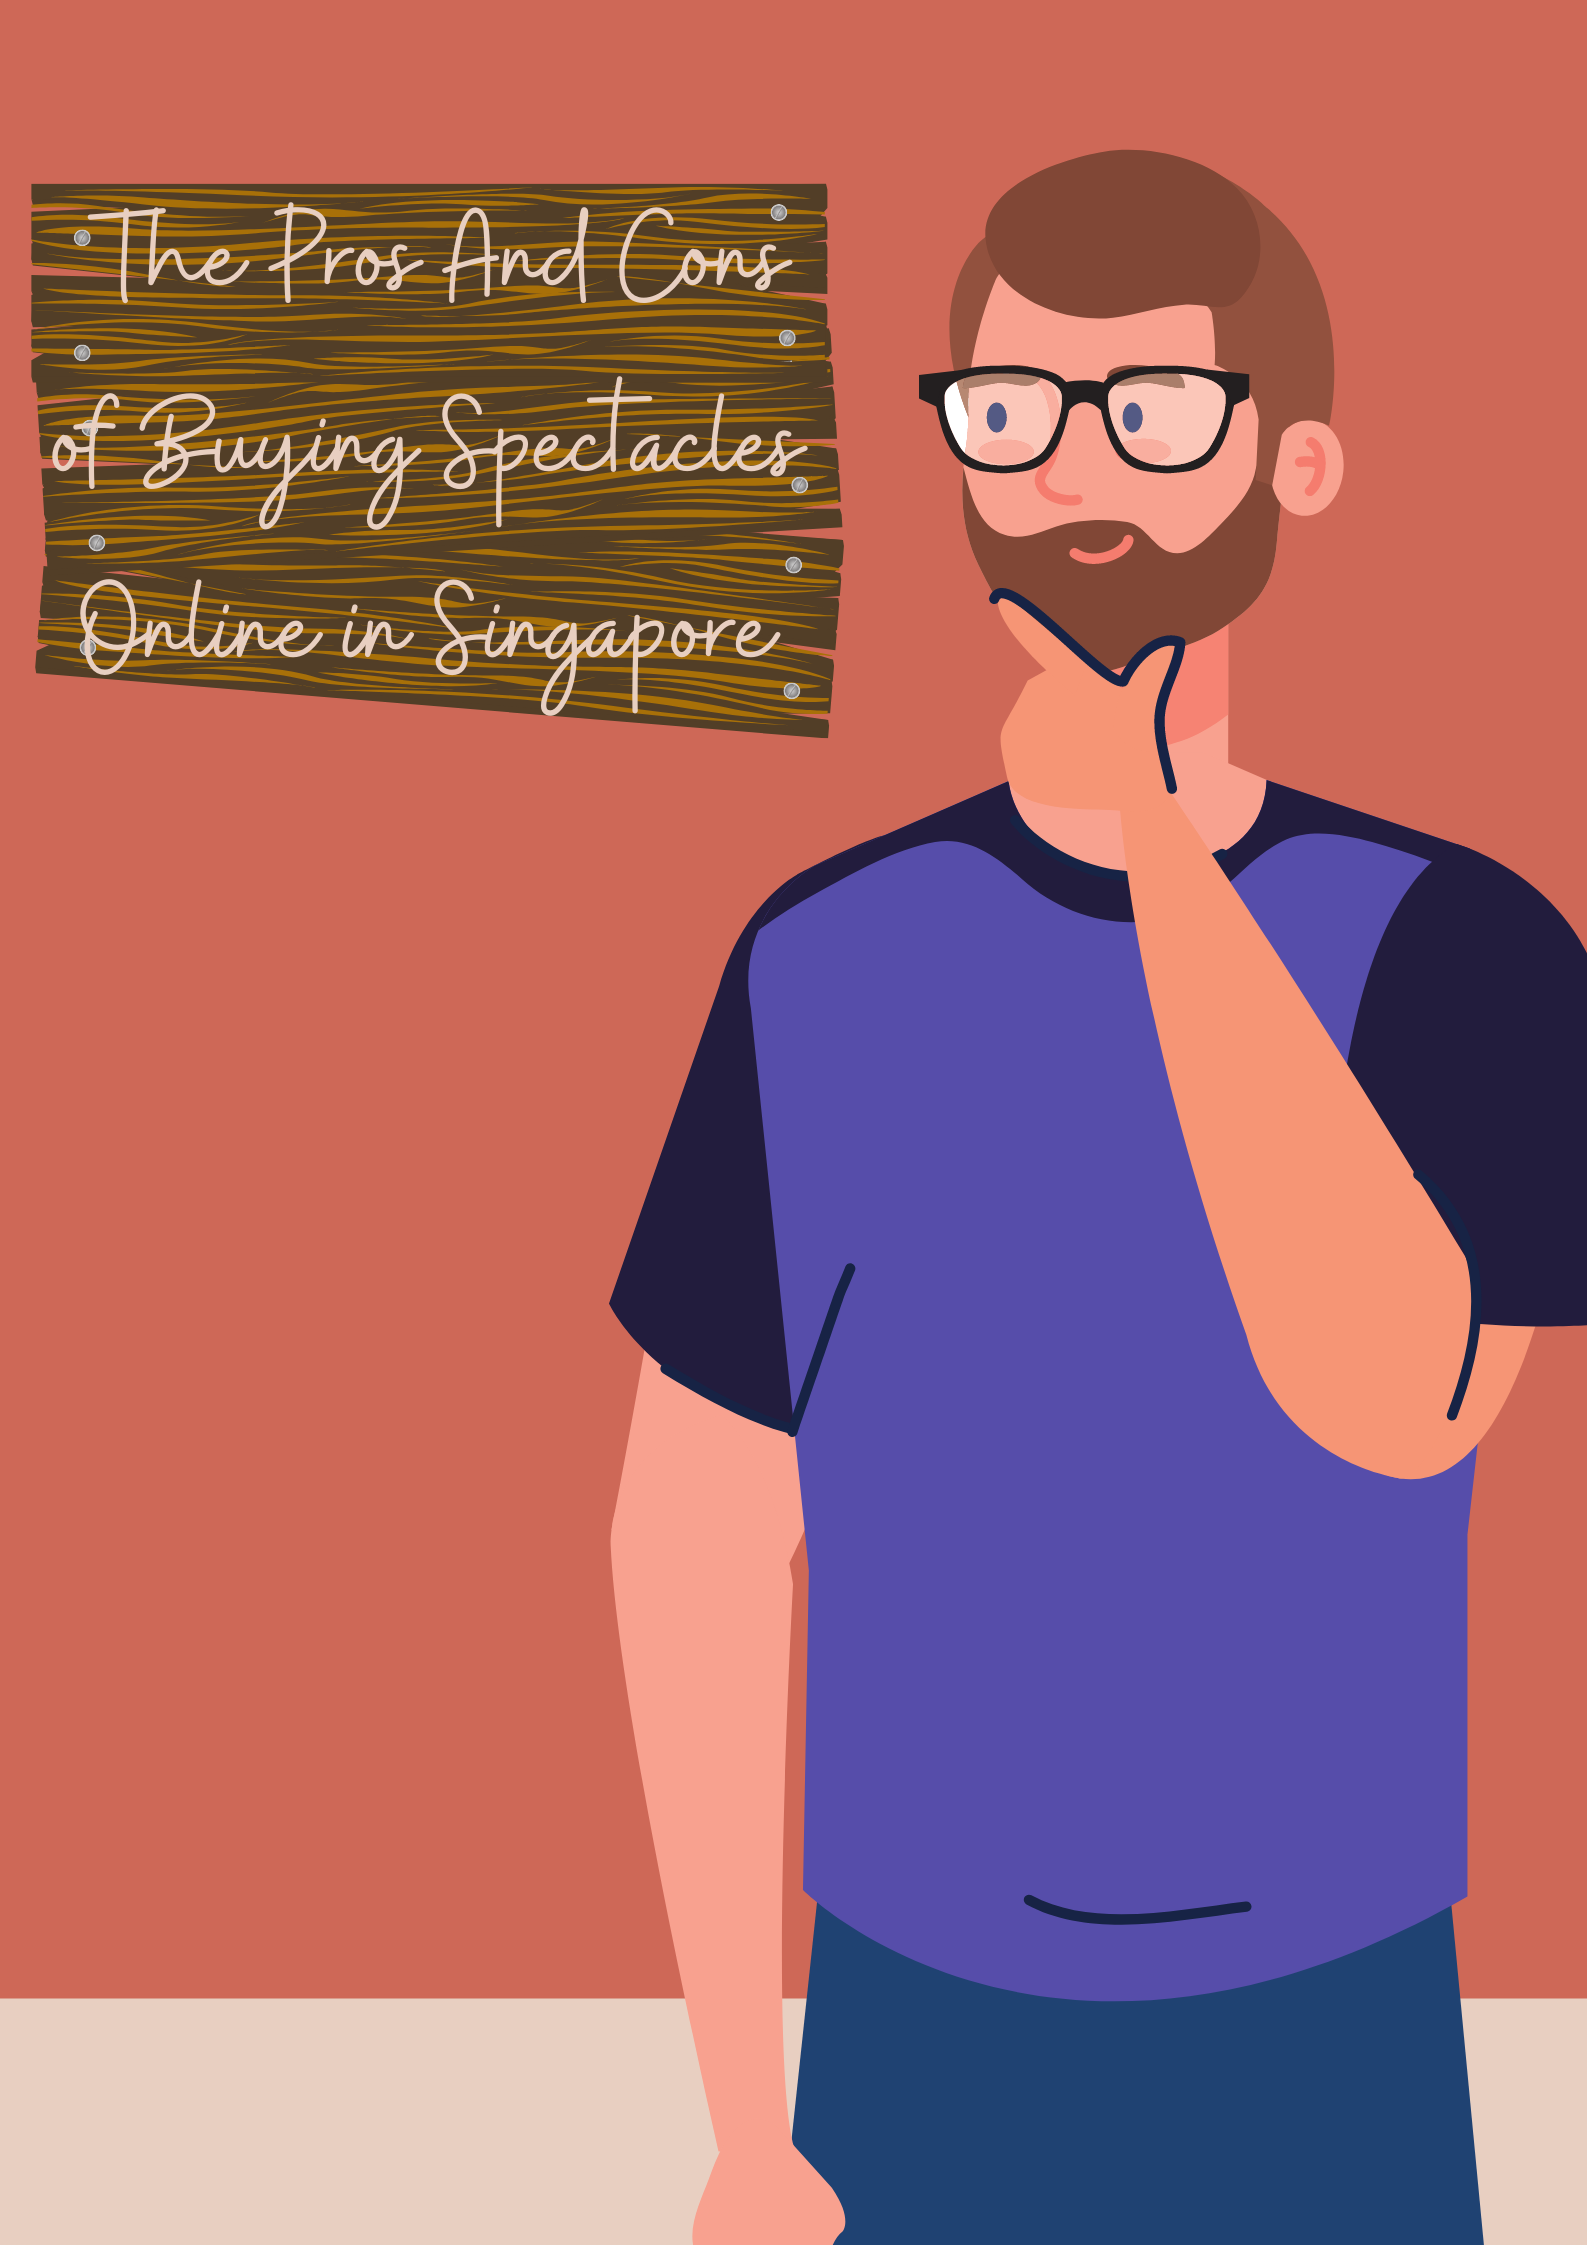 The-Pros-And-Cons-of-Buying-Spectacles-Online-in-Singapore.png